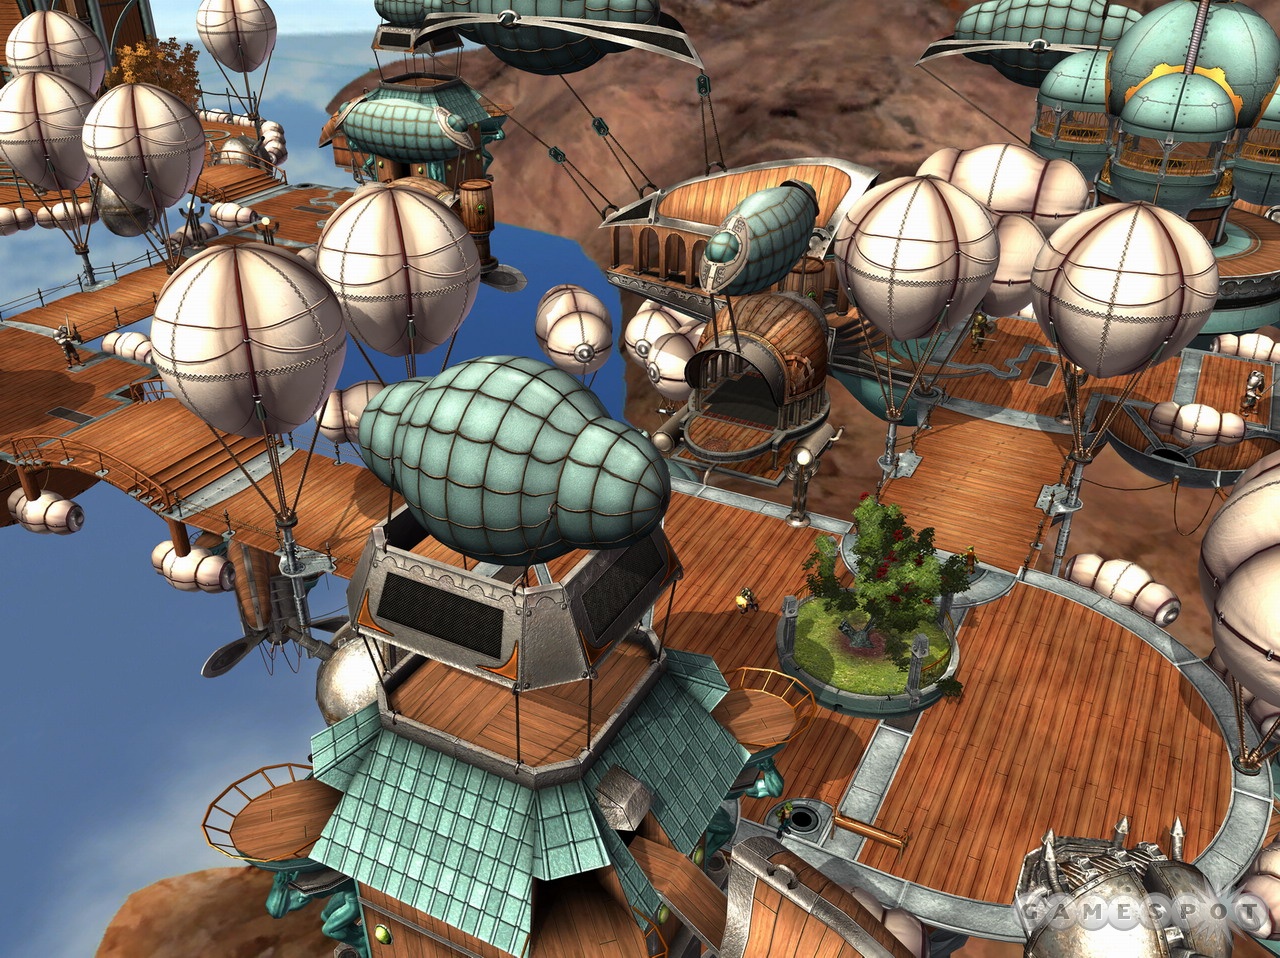 The art style helps bring the imaginative environments, such as the floating city of Cloudworks, to life.